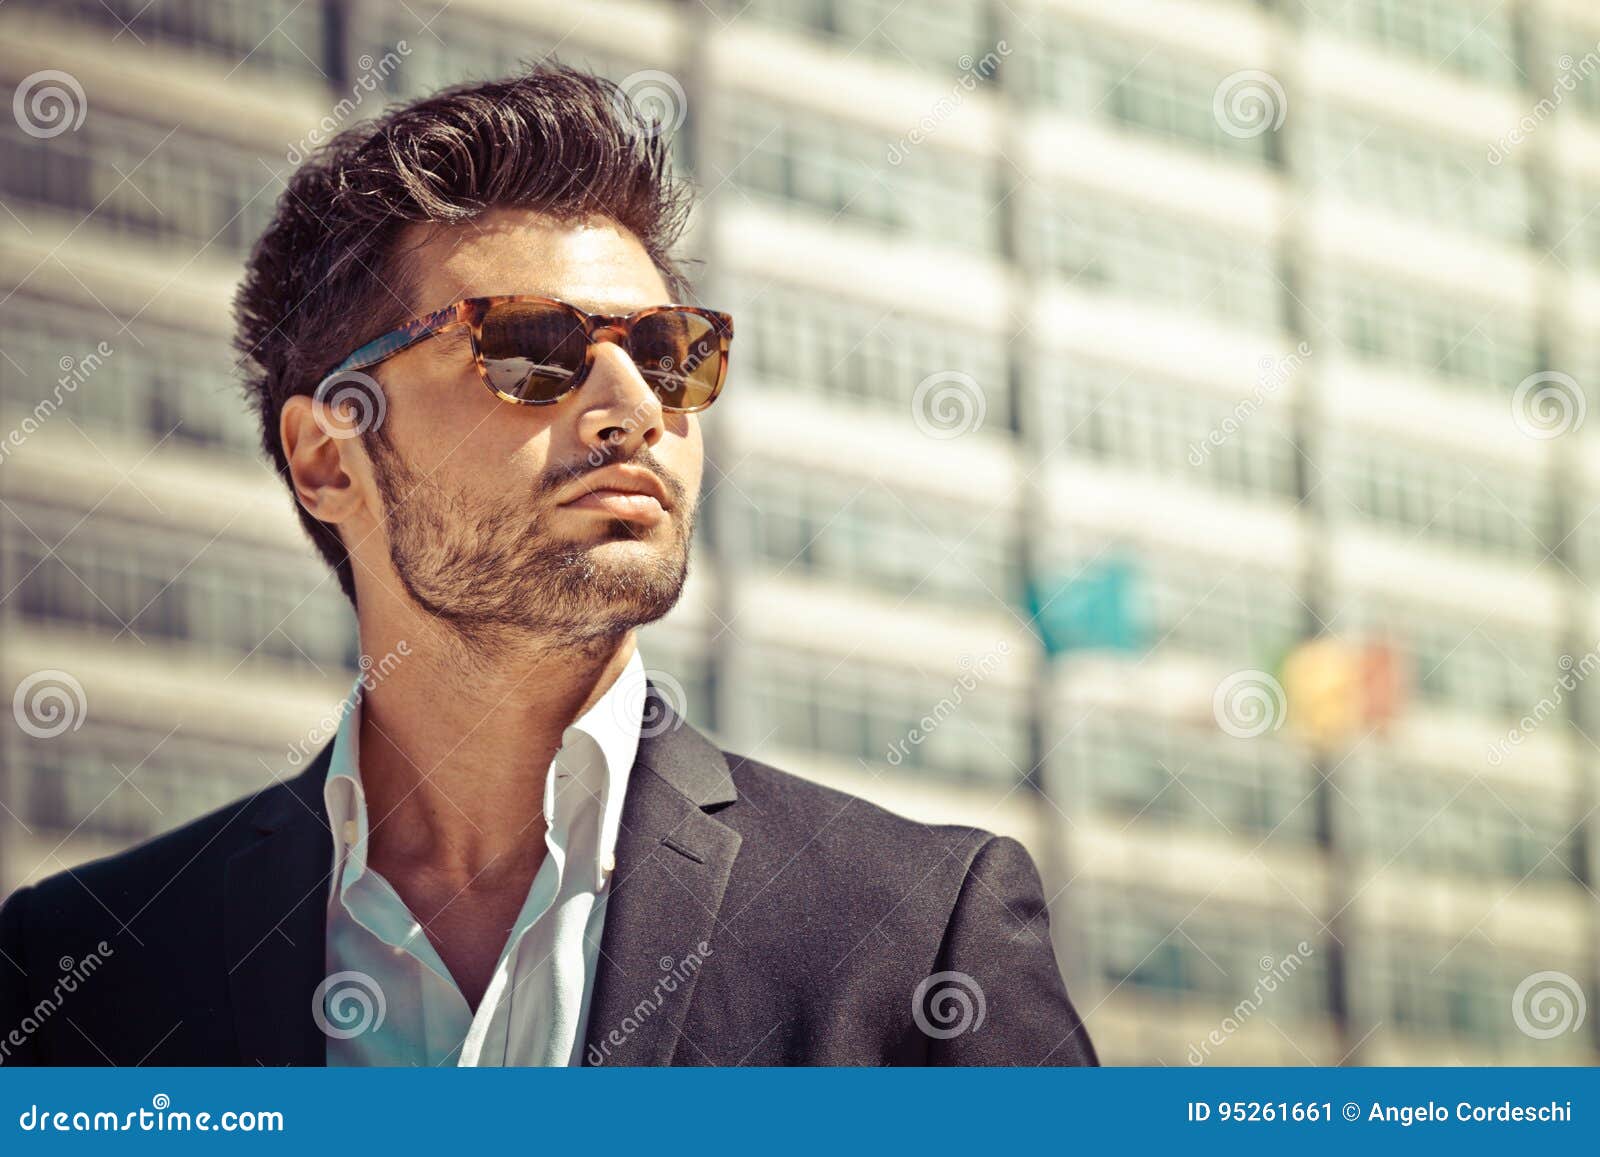 handsome businessman with sunglasses